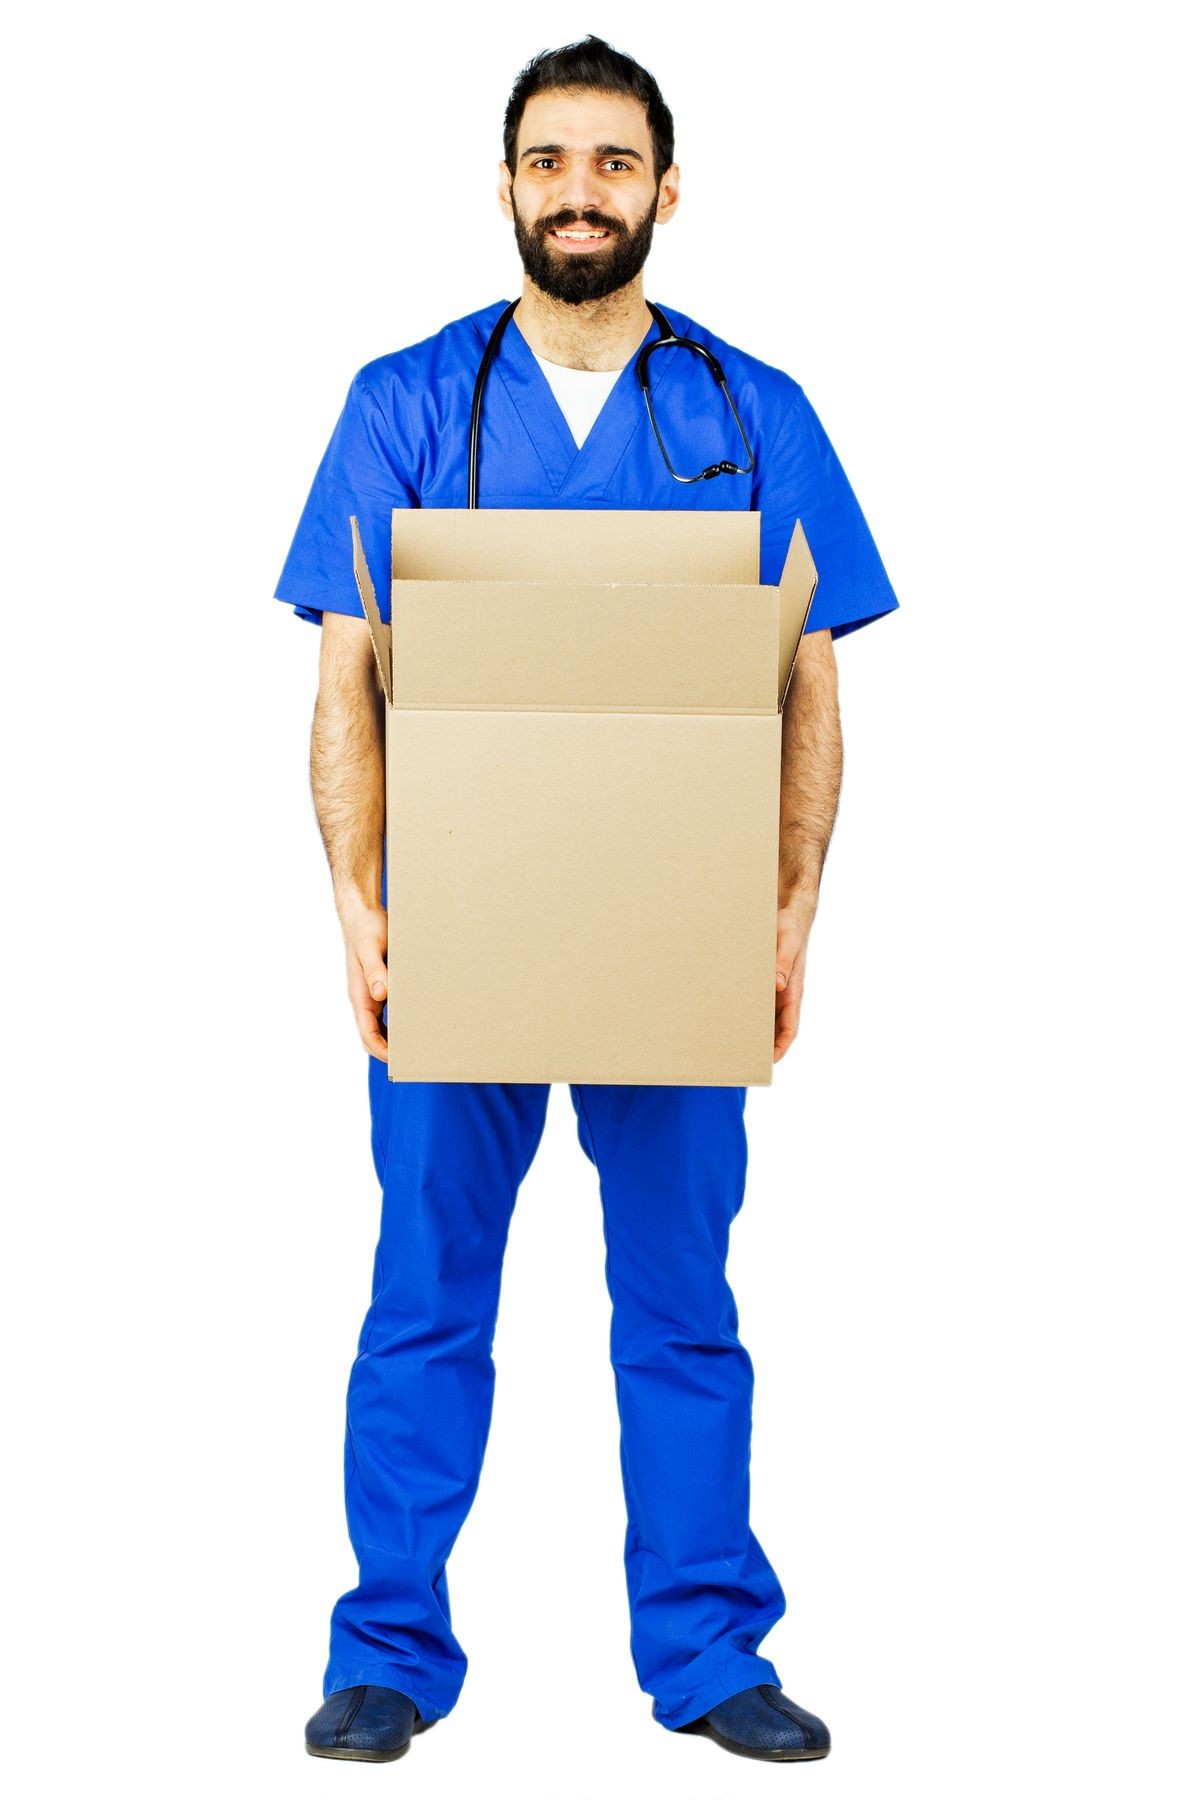 doctor smiling and holding a box . on white Studio background.